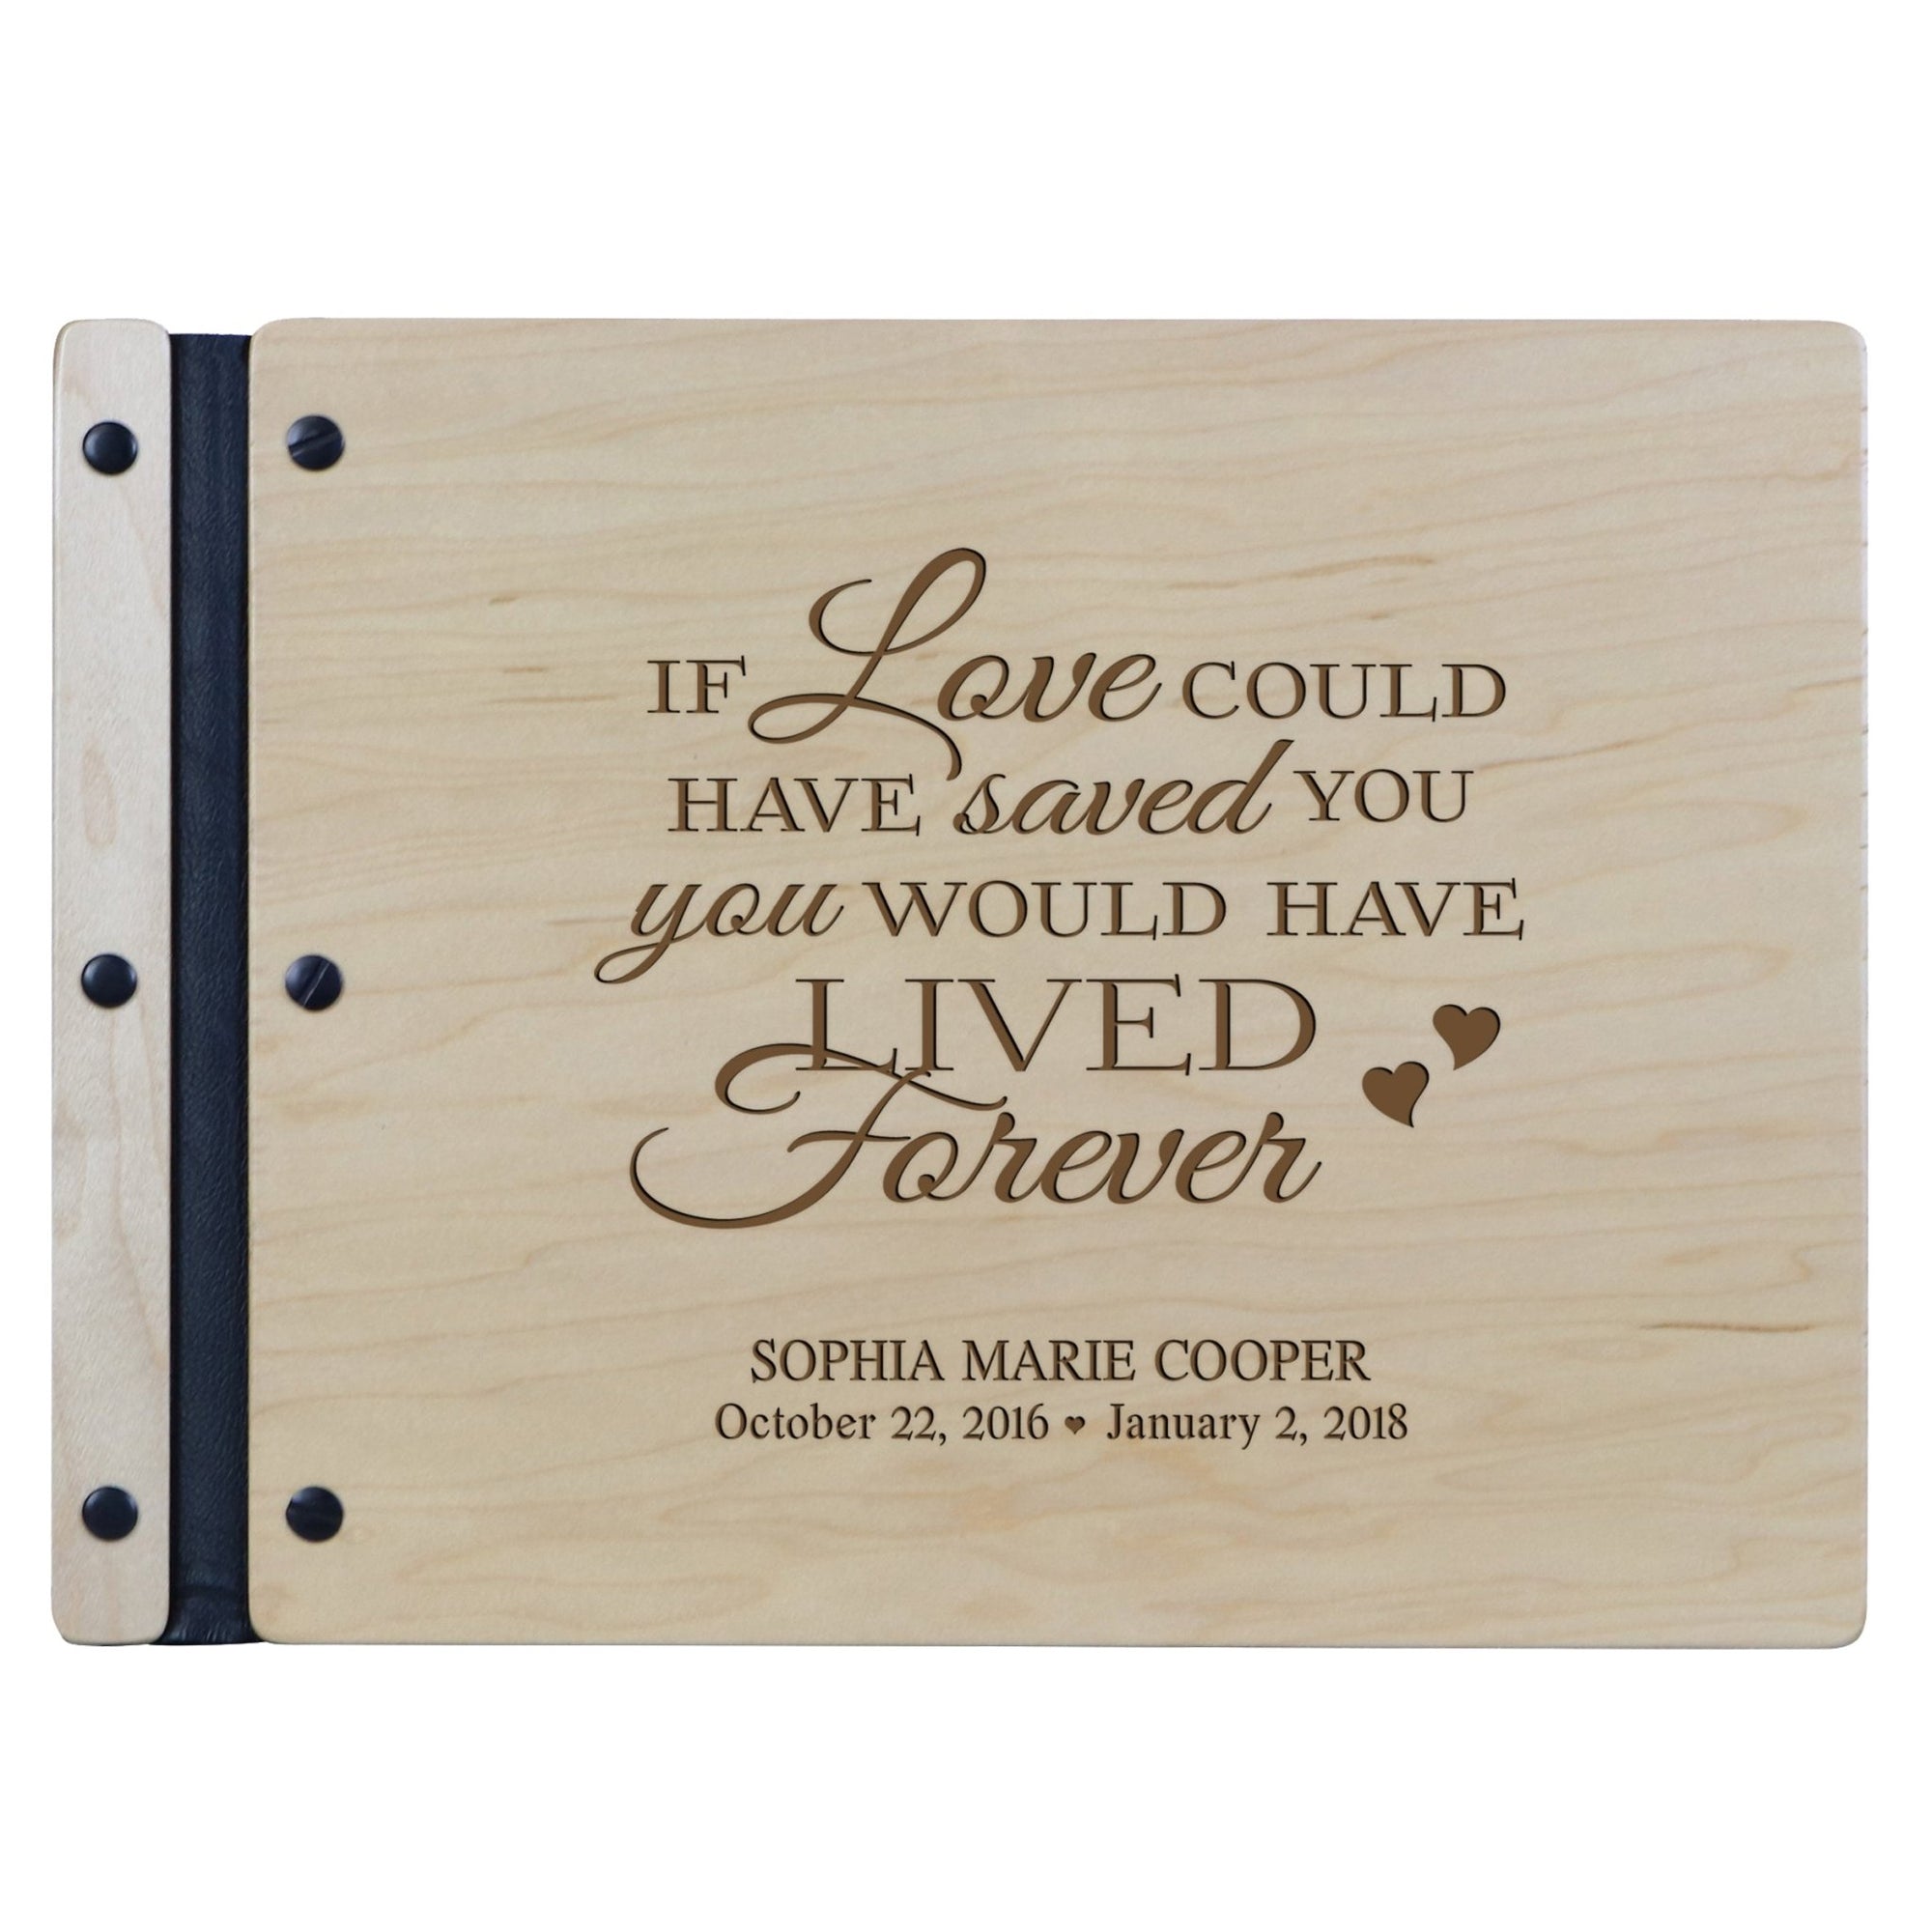 Personalized Memorial Guest Book - If Love - LifeSong Milestones